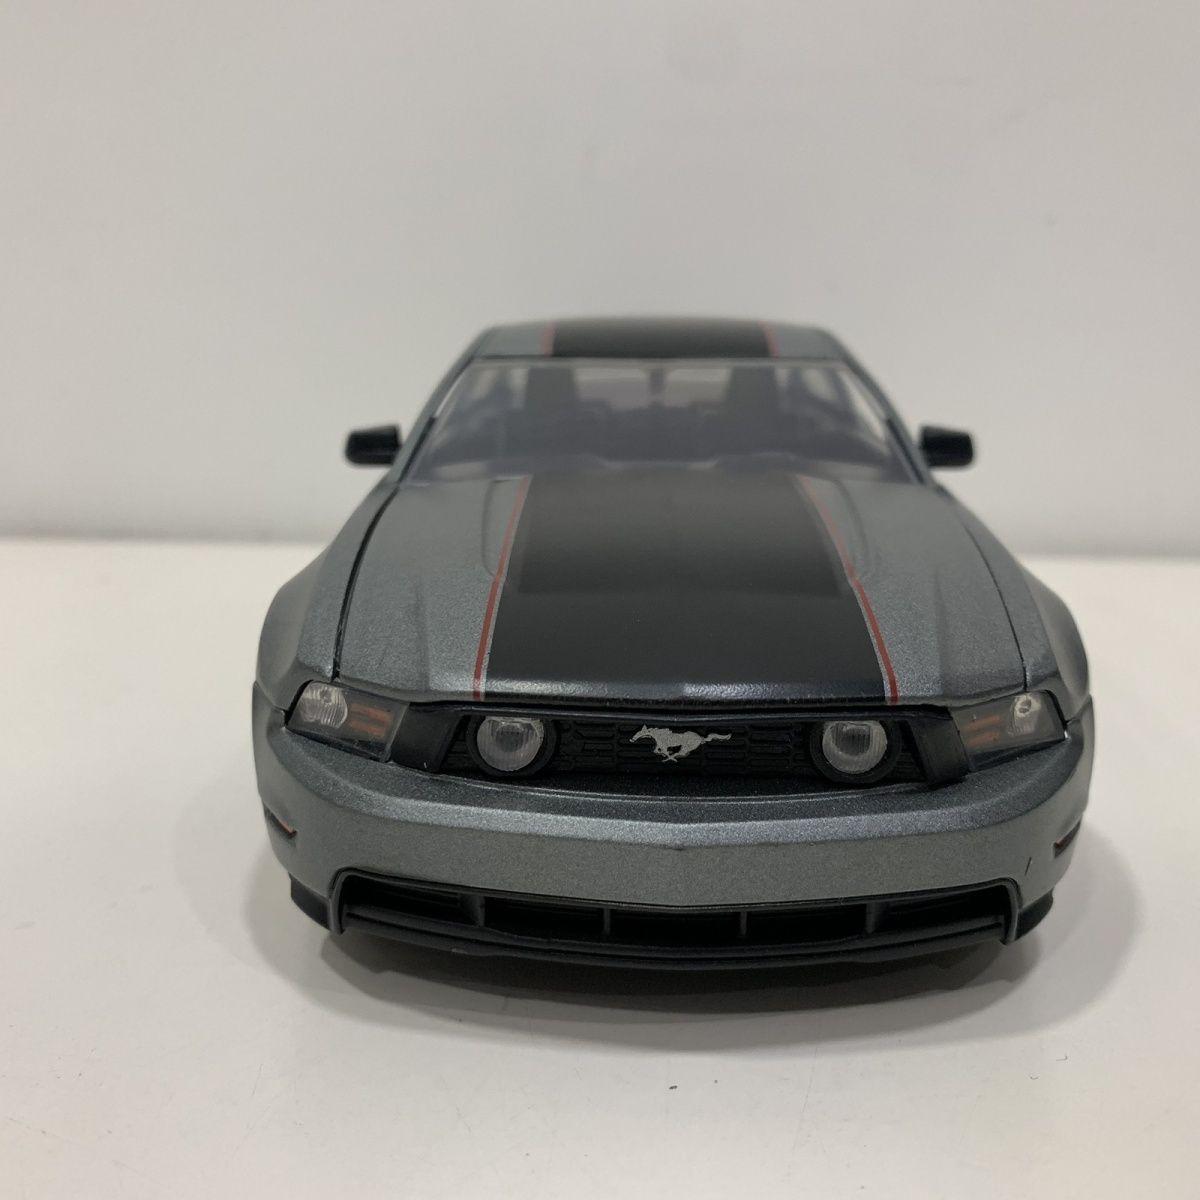 JADA-1-24-Ford-Mustang-2010-Toy-Alloy-Car-Diecasts-Toy-Vehicles-Car-Model-Miniature-Scale.jpg